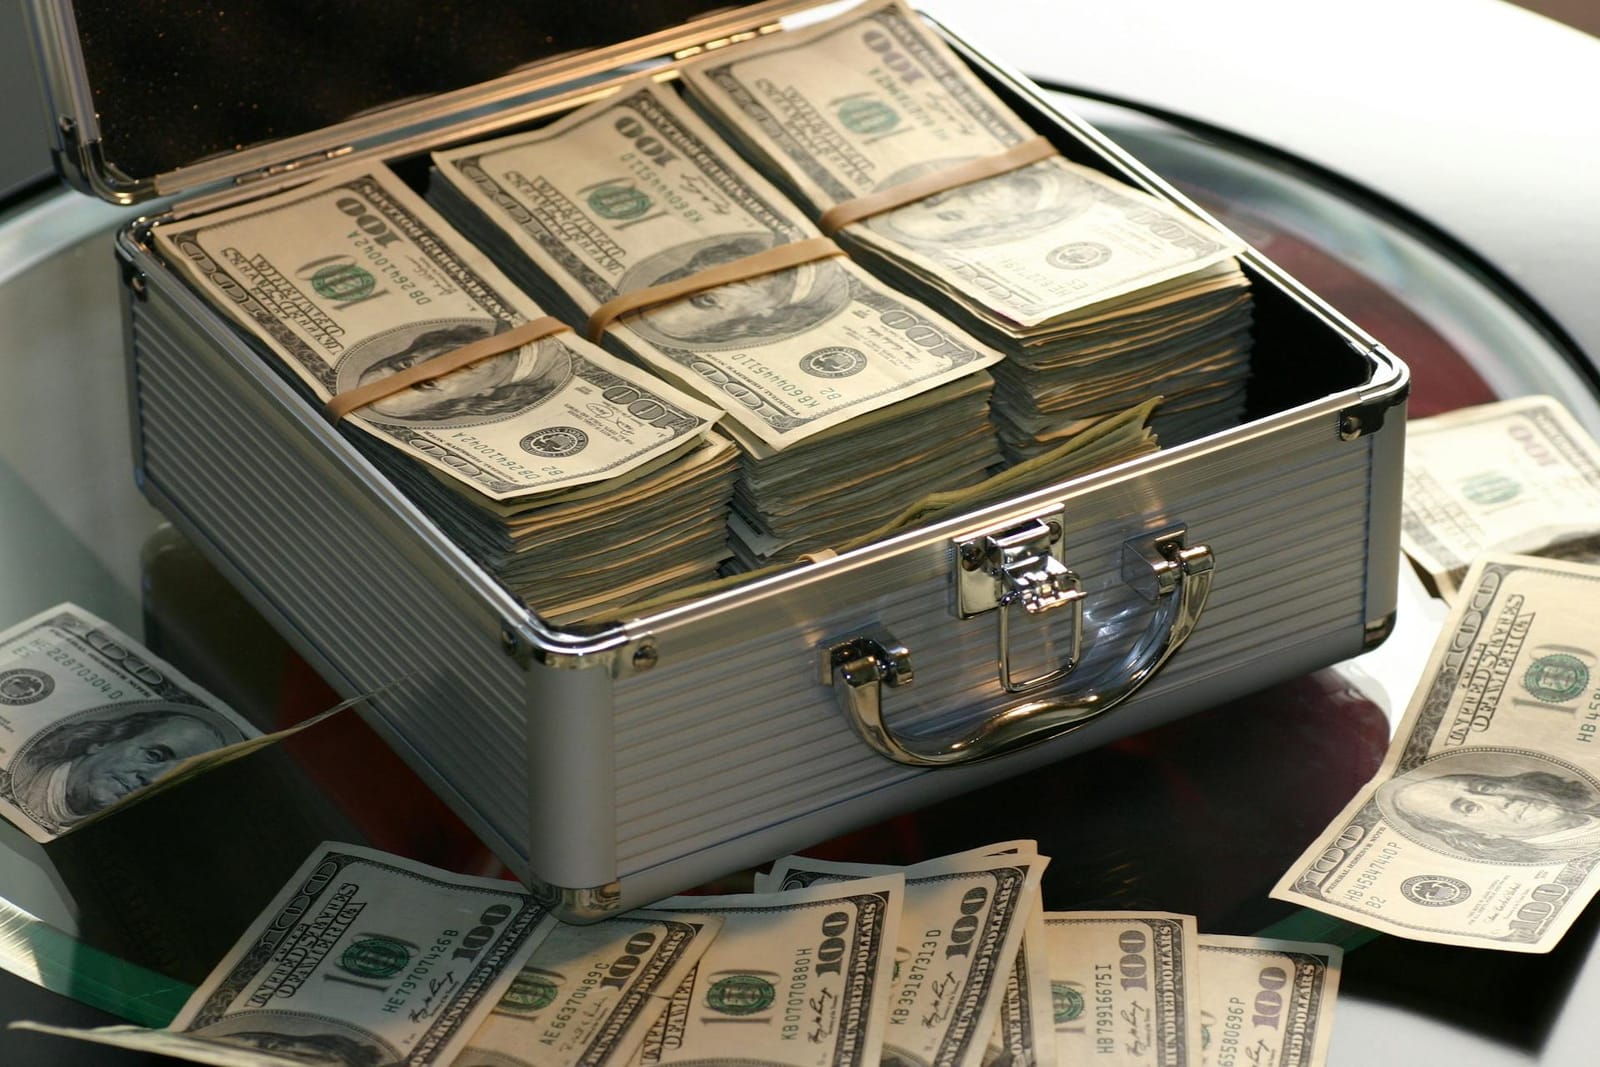 A suitcase filled with money